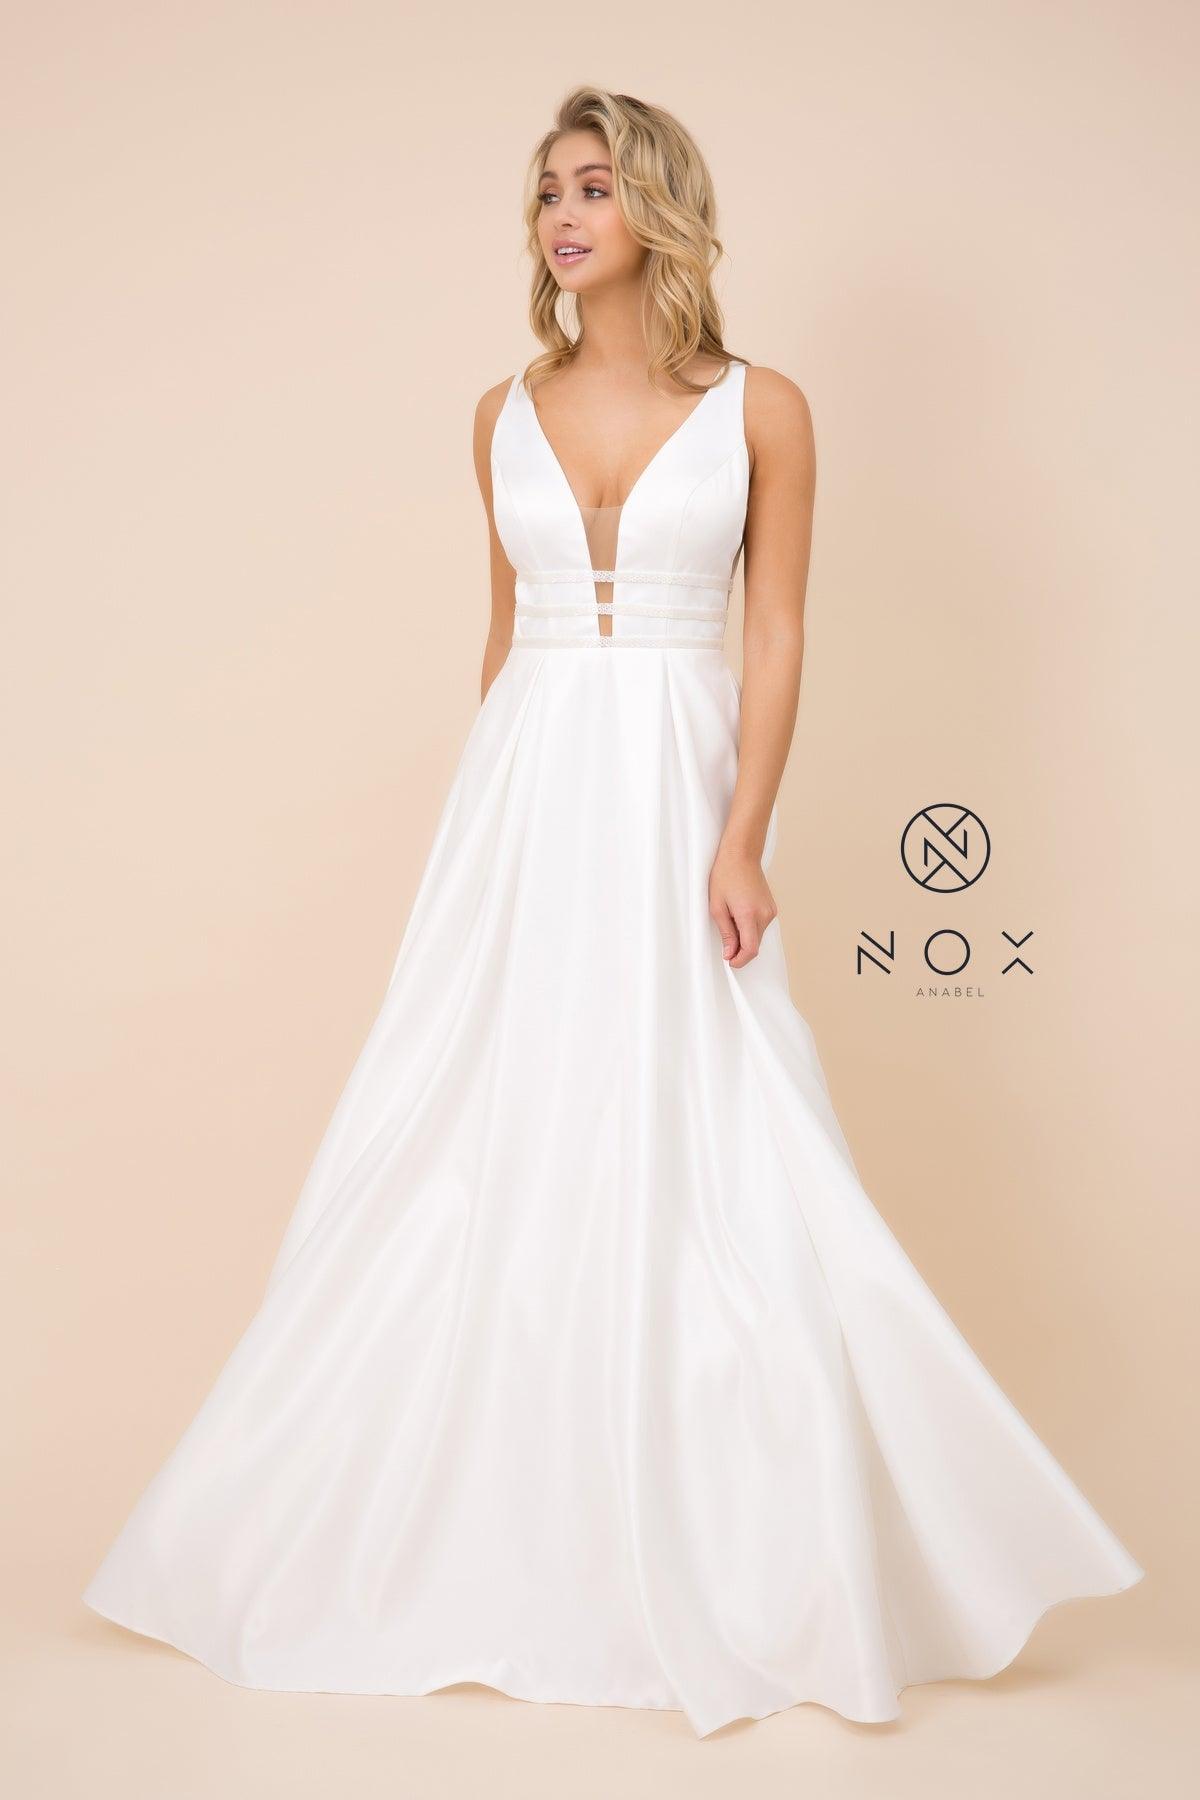 Long Formal Bridal Wedding Dress with Pockets White - The Dress Outlet Nox Anabel